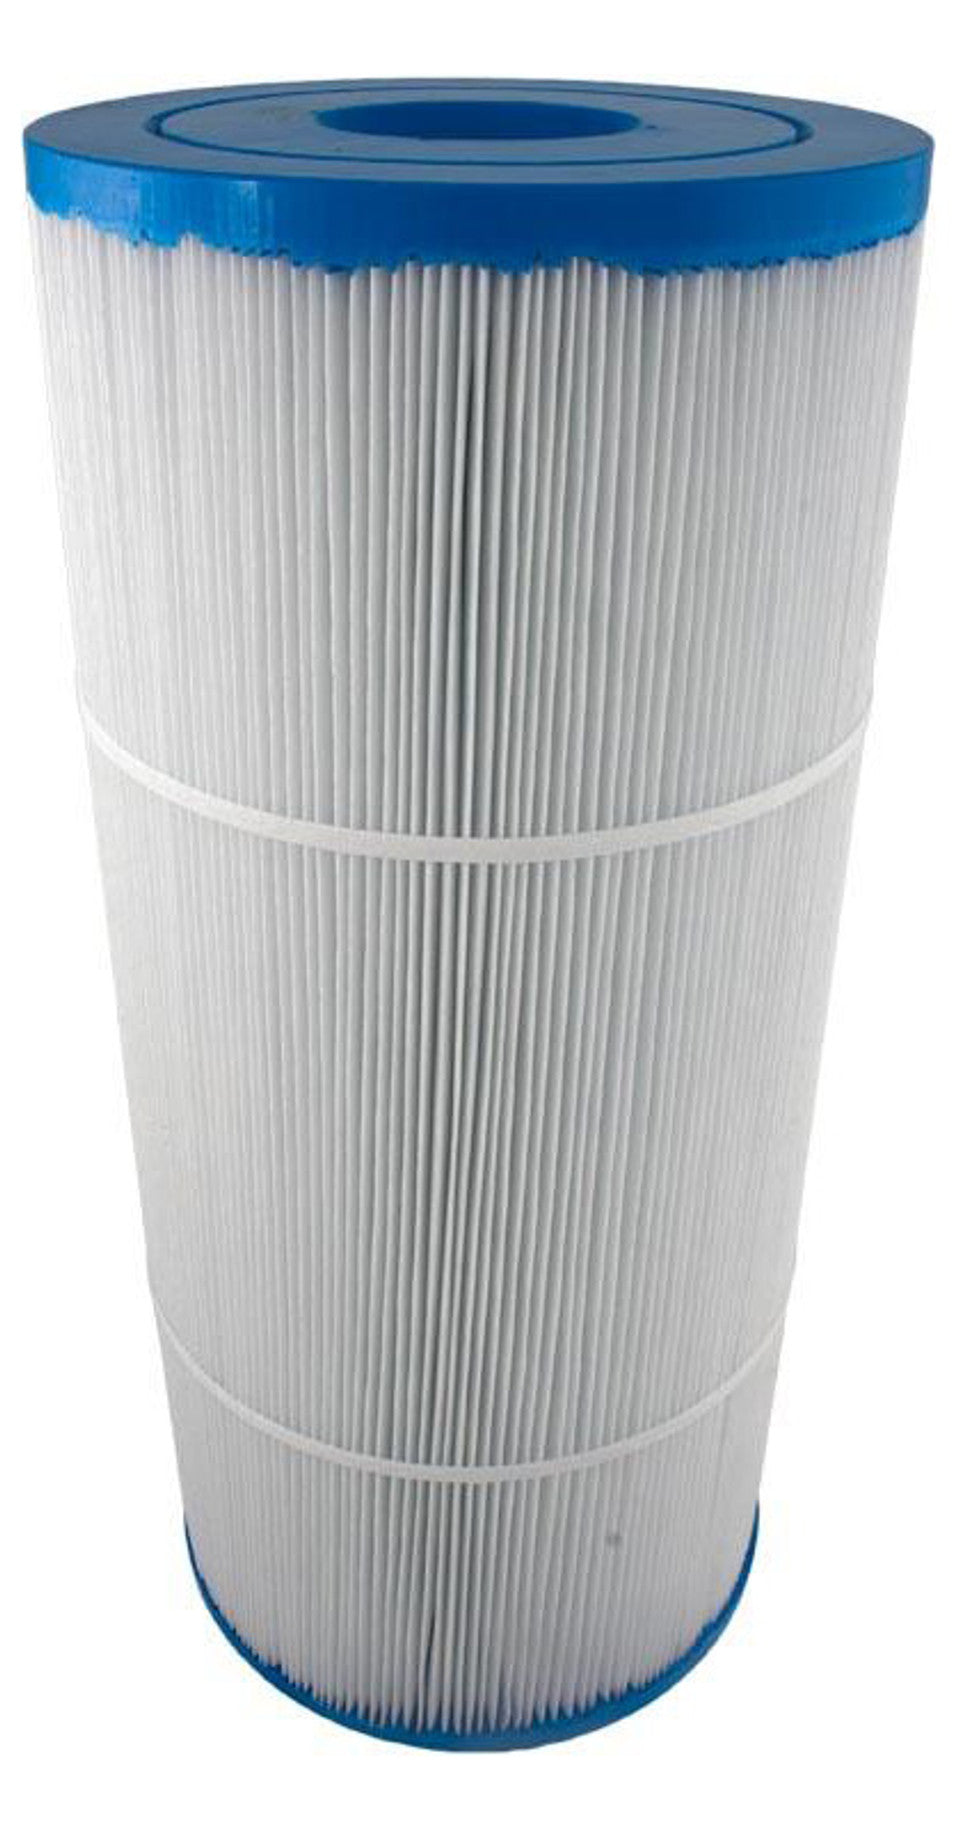 Darlly 81252 Filter Cartridge Replaces PSD125-2000, C-8326 and FC-2780